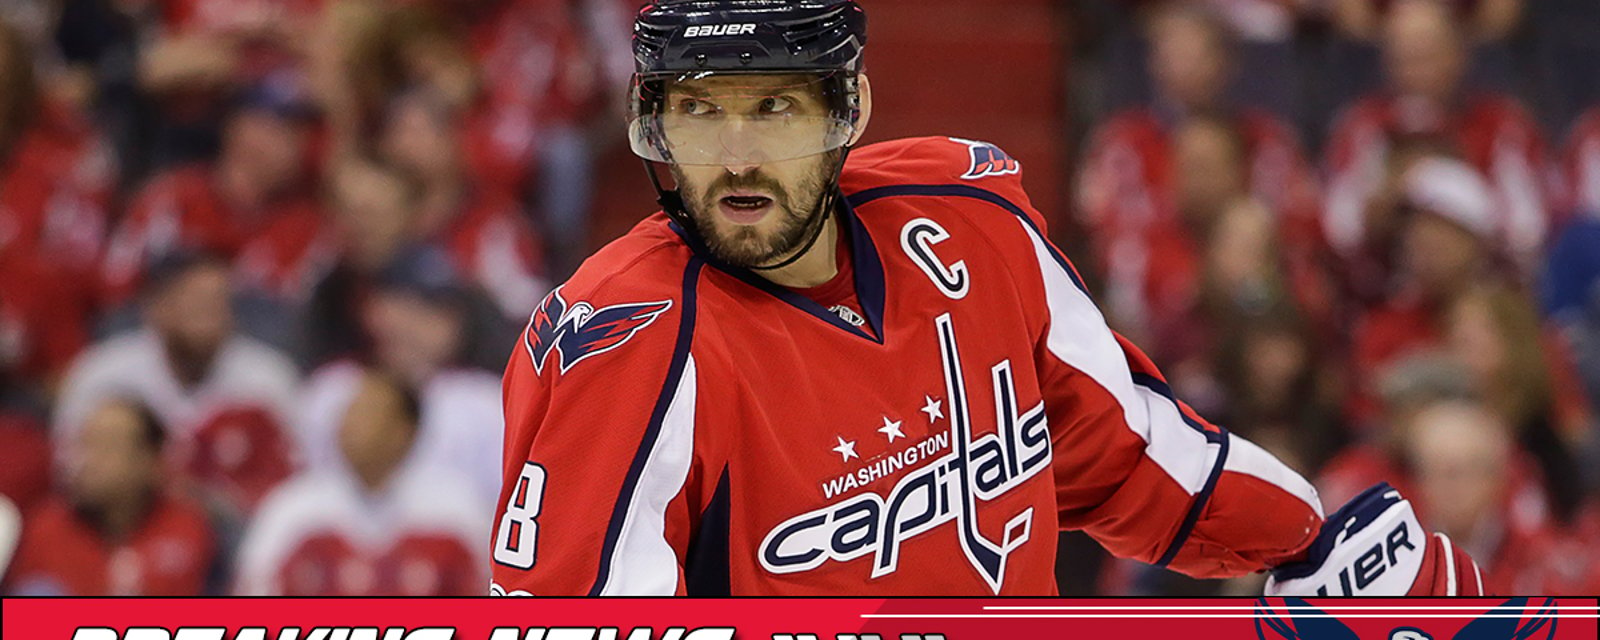 Ovechkin makes CONTROVERSIAL comments after game 1 loss